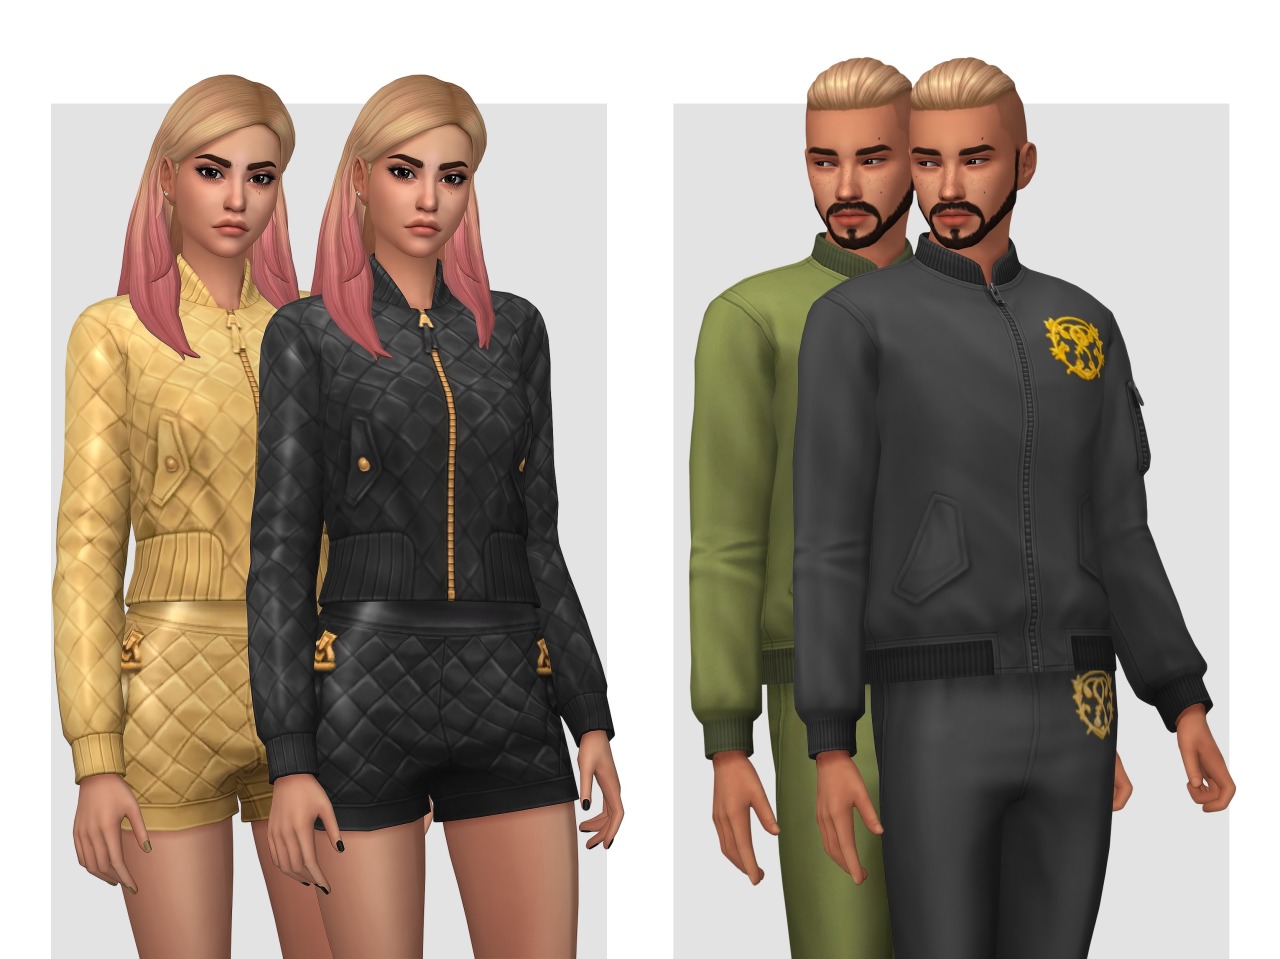 The Sims 4: MOSCHINO STUFF PACK CAS REVIEW 